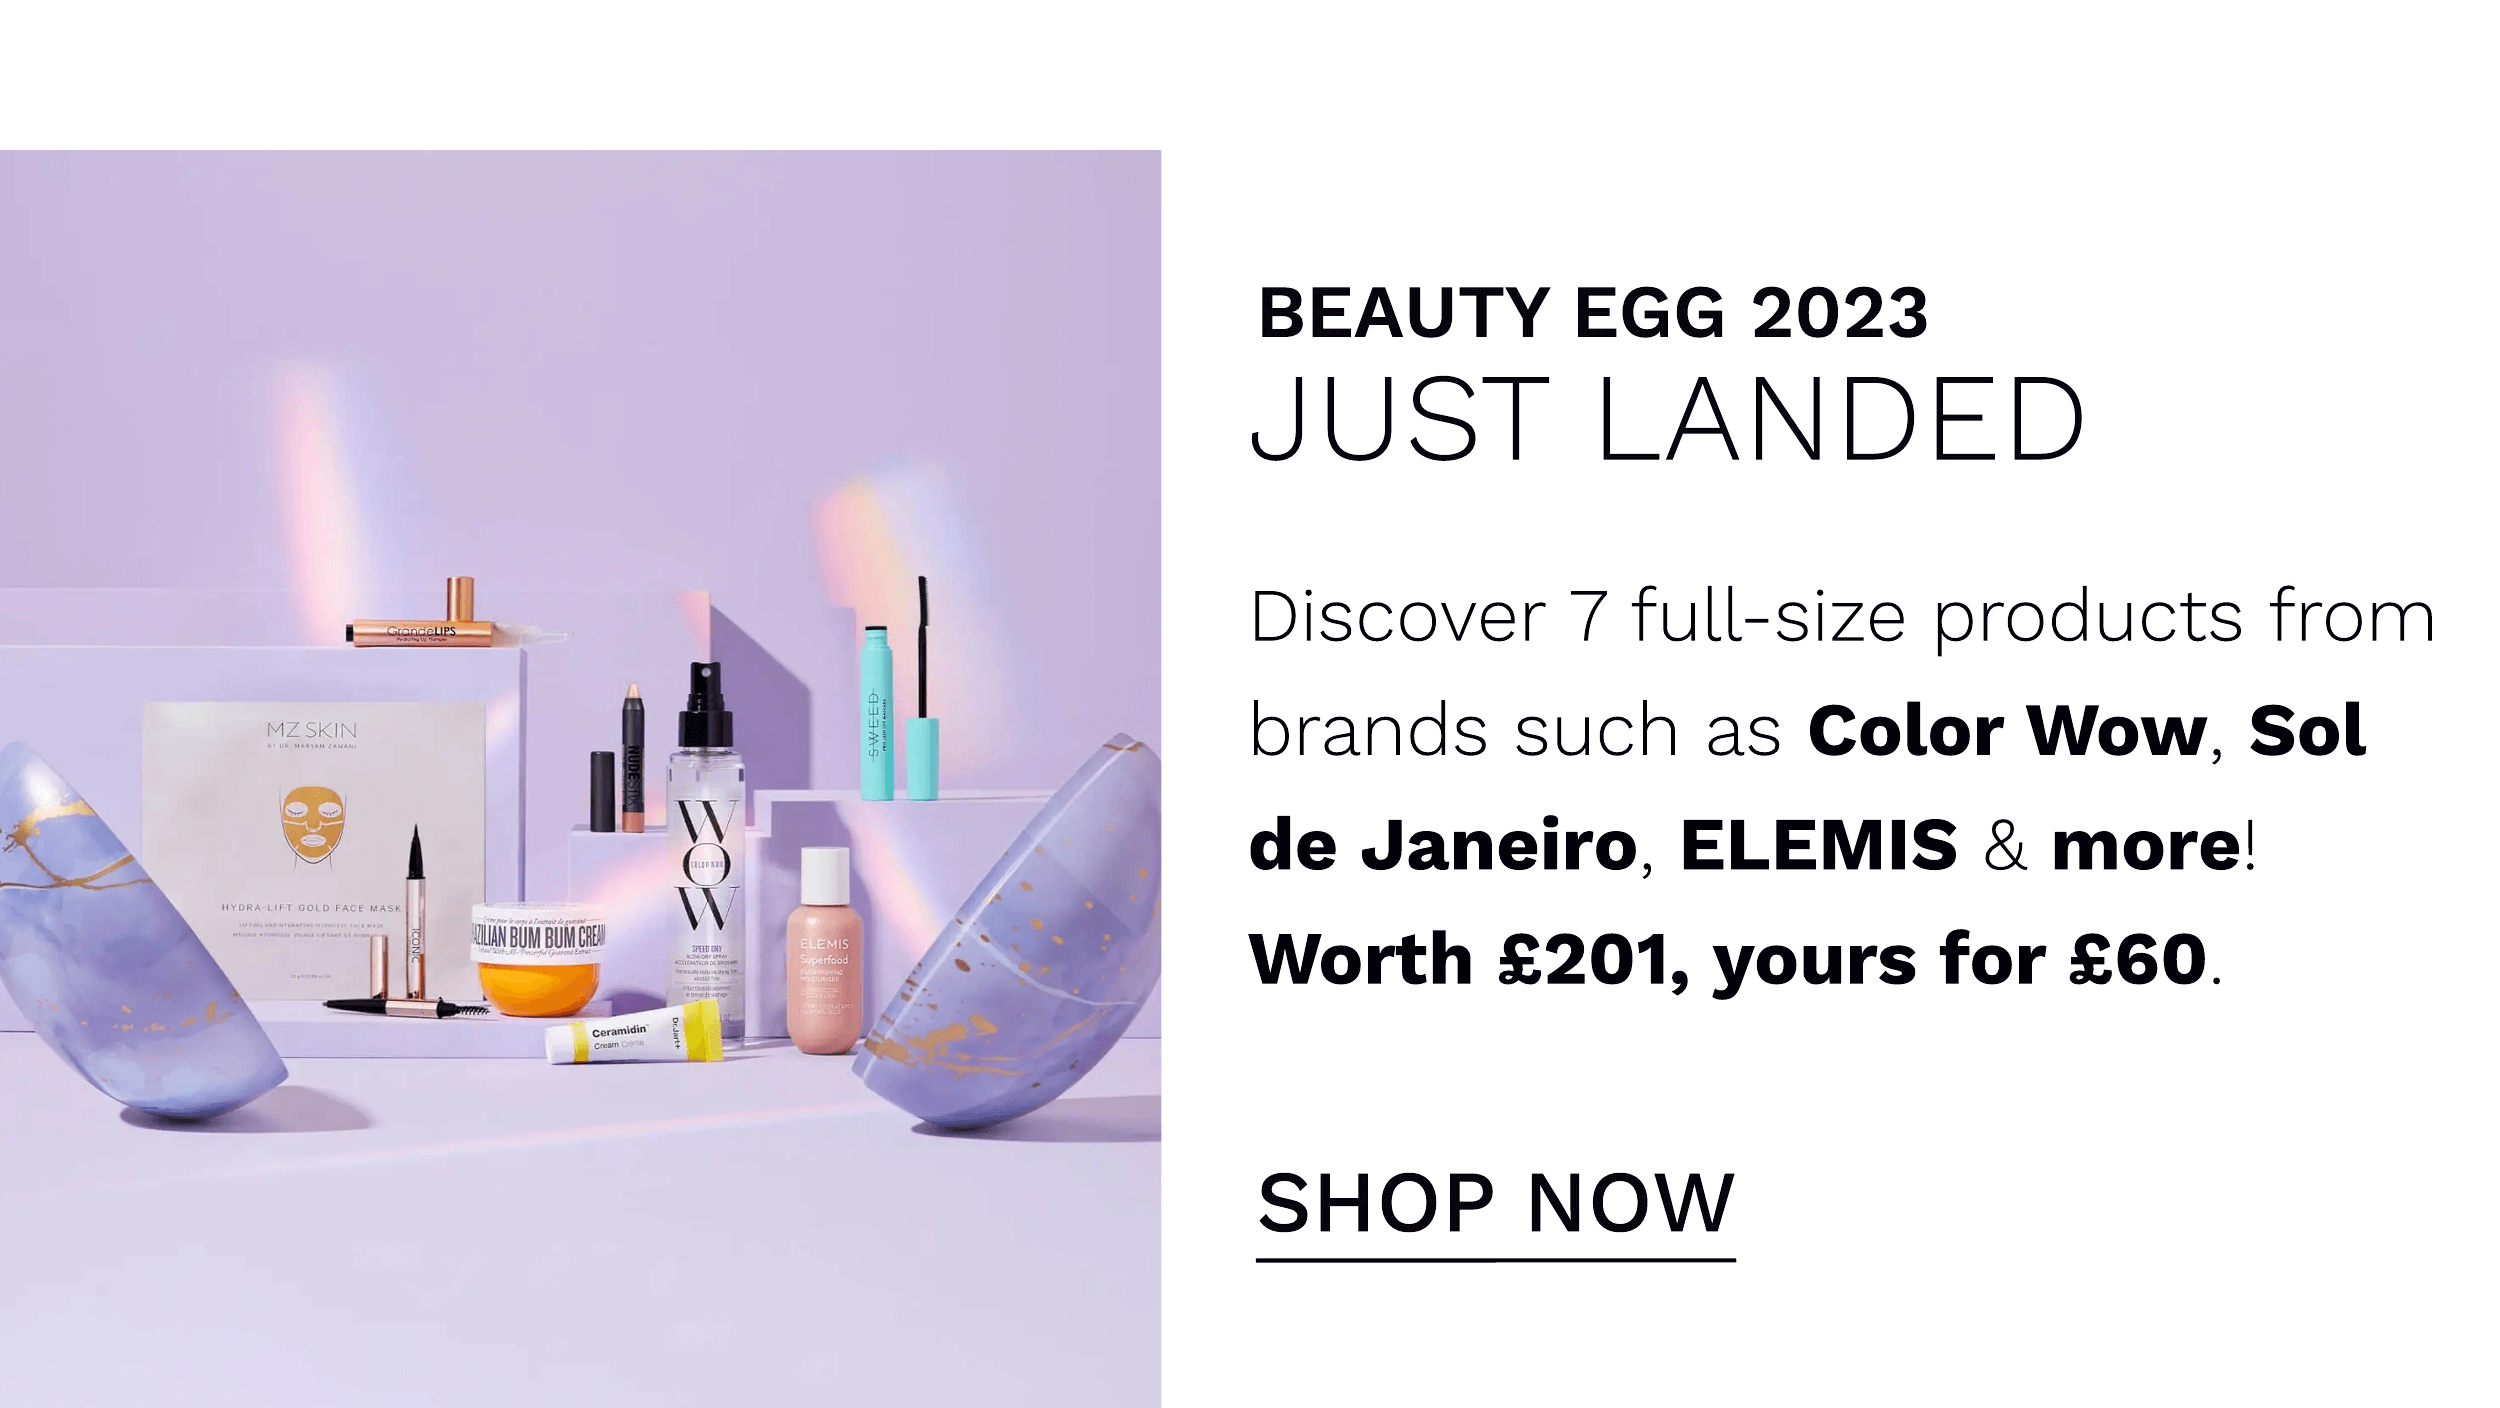  BEAUTY EGG 2023 JUST LANDED Discover 7 full-size products from brands such as Color Wow, Sol de Janeiro, ELEMIS more! Worth 201, yours for 60. SHOP NOW 